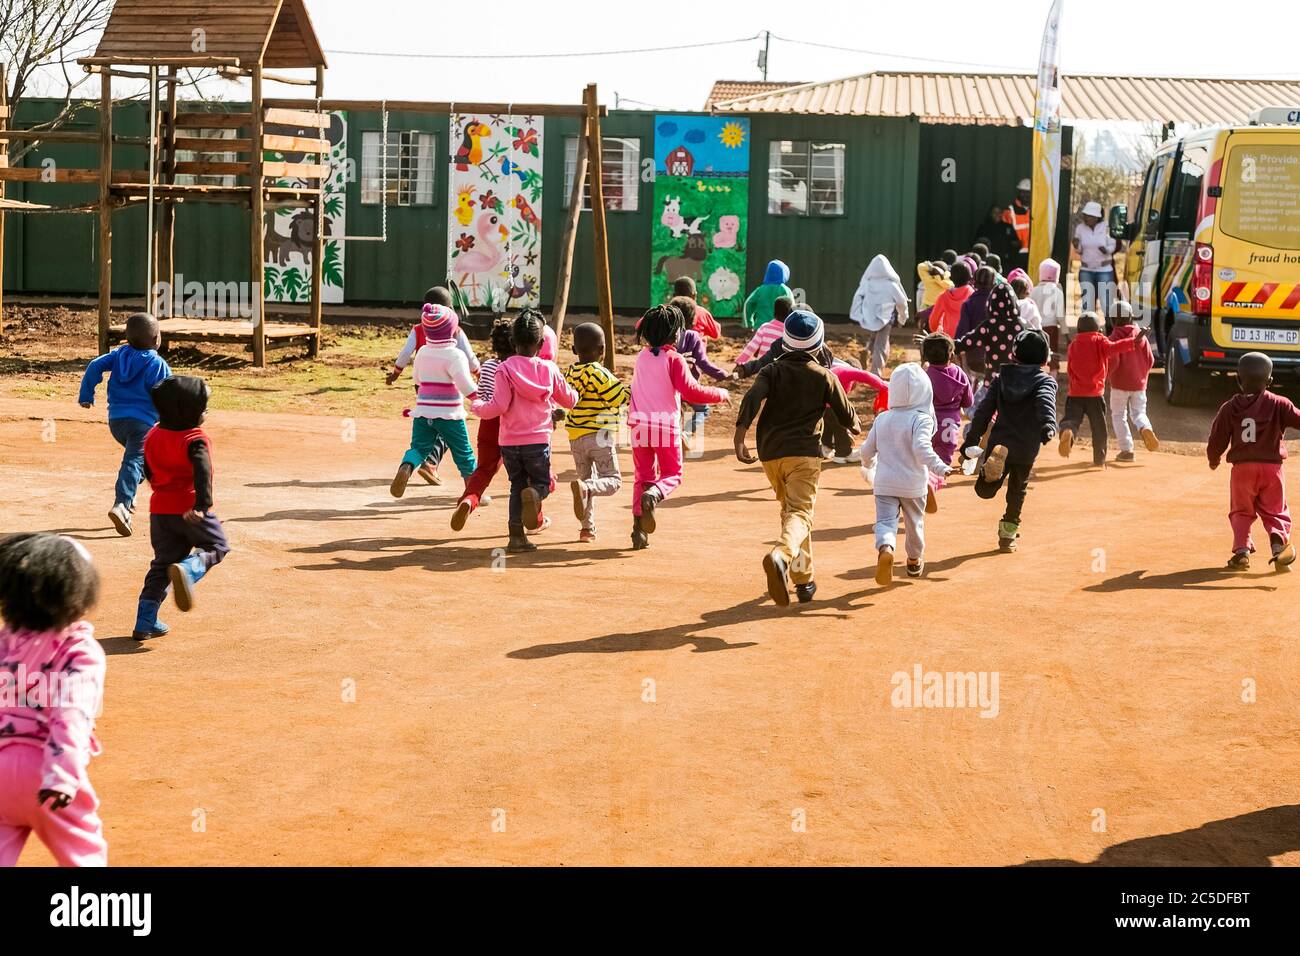 Soweto, South Africa - July 18, 2016: Young African Preschool kids playing in the playground of a kindergarten school Stock Photo